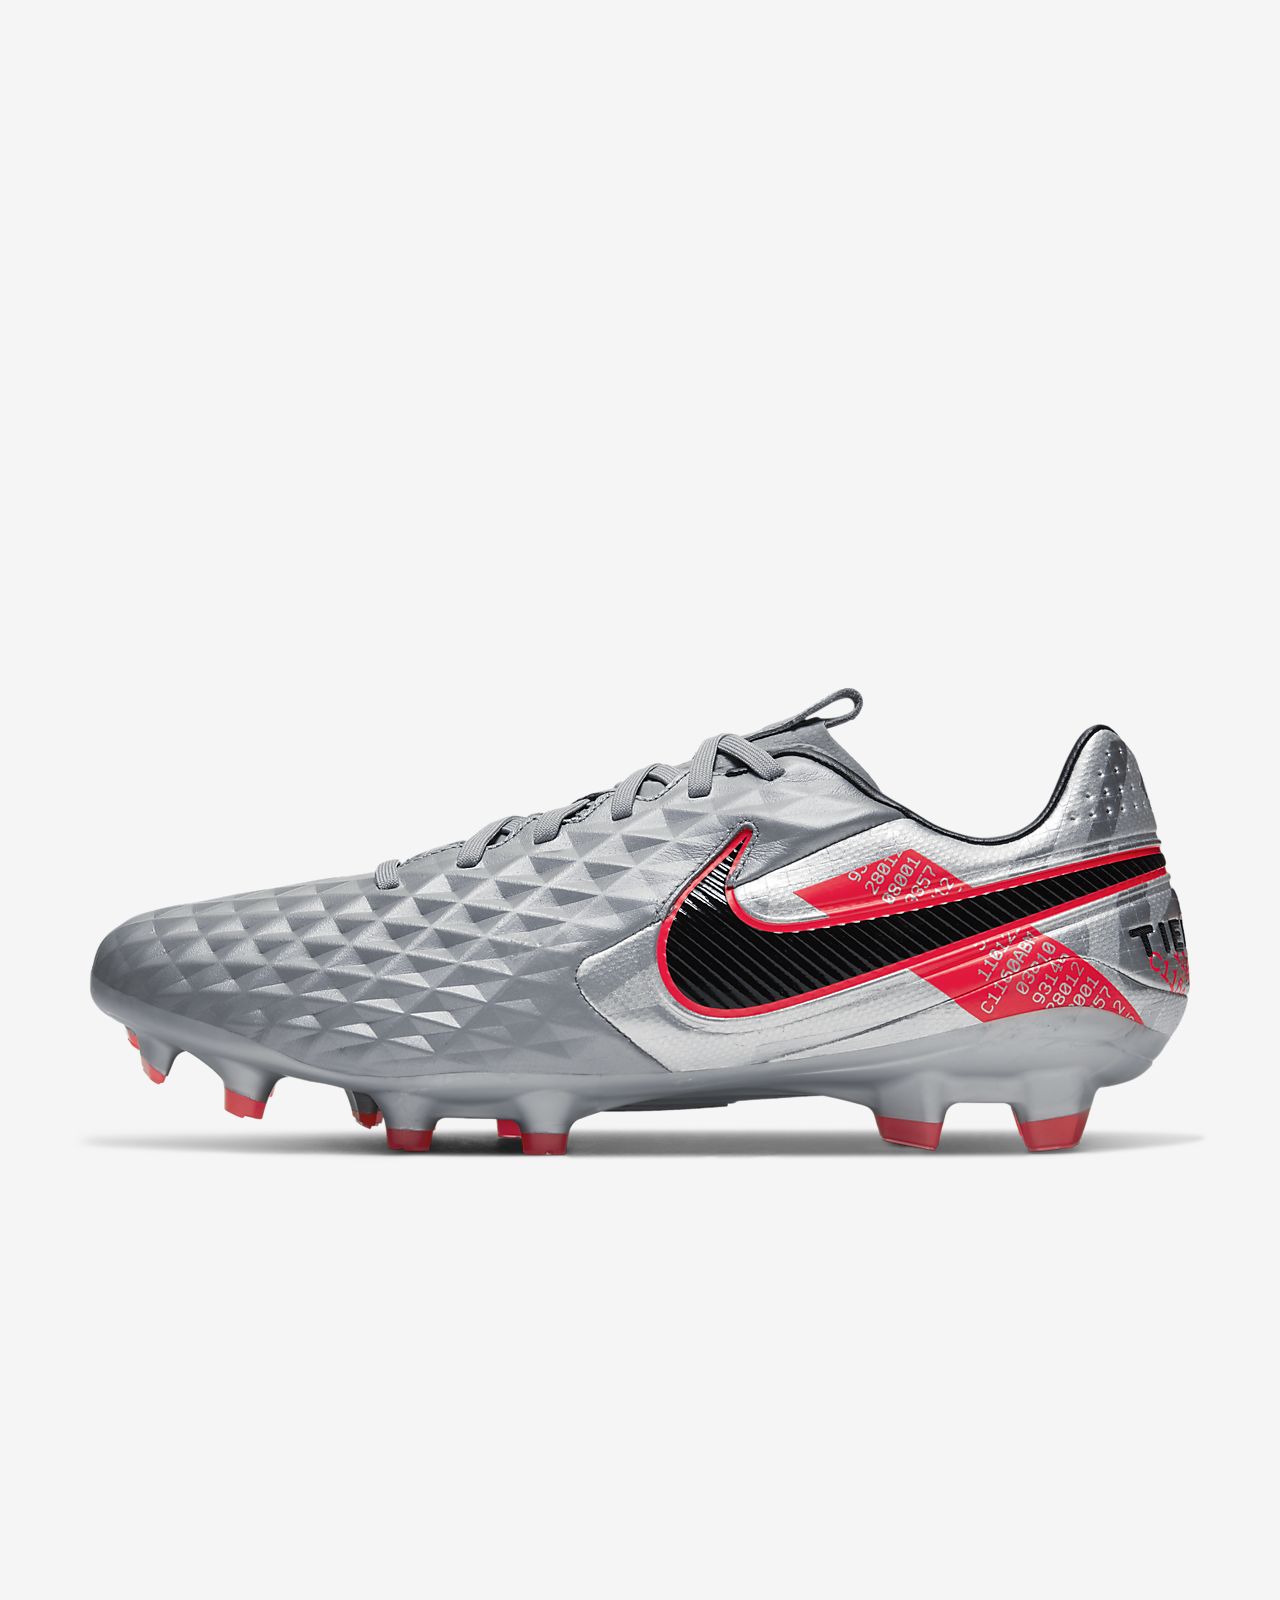 Nike Weather Legend 8 Academy Tf At6100 010 Price ‹ie